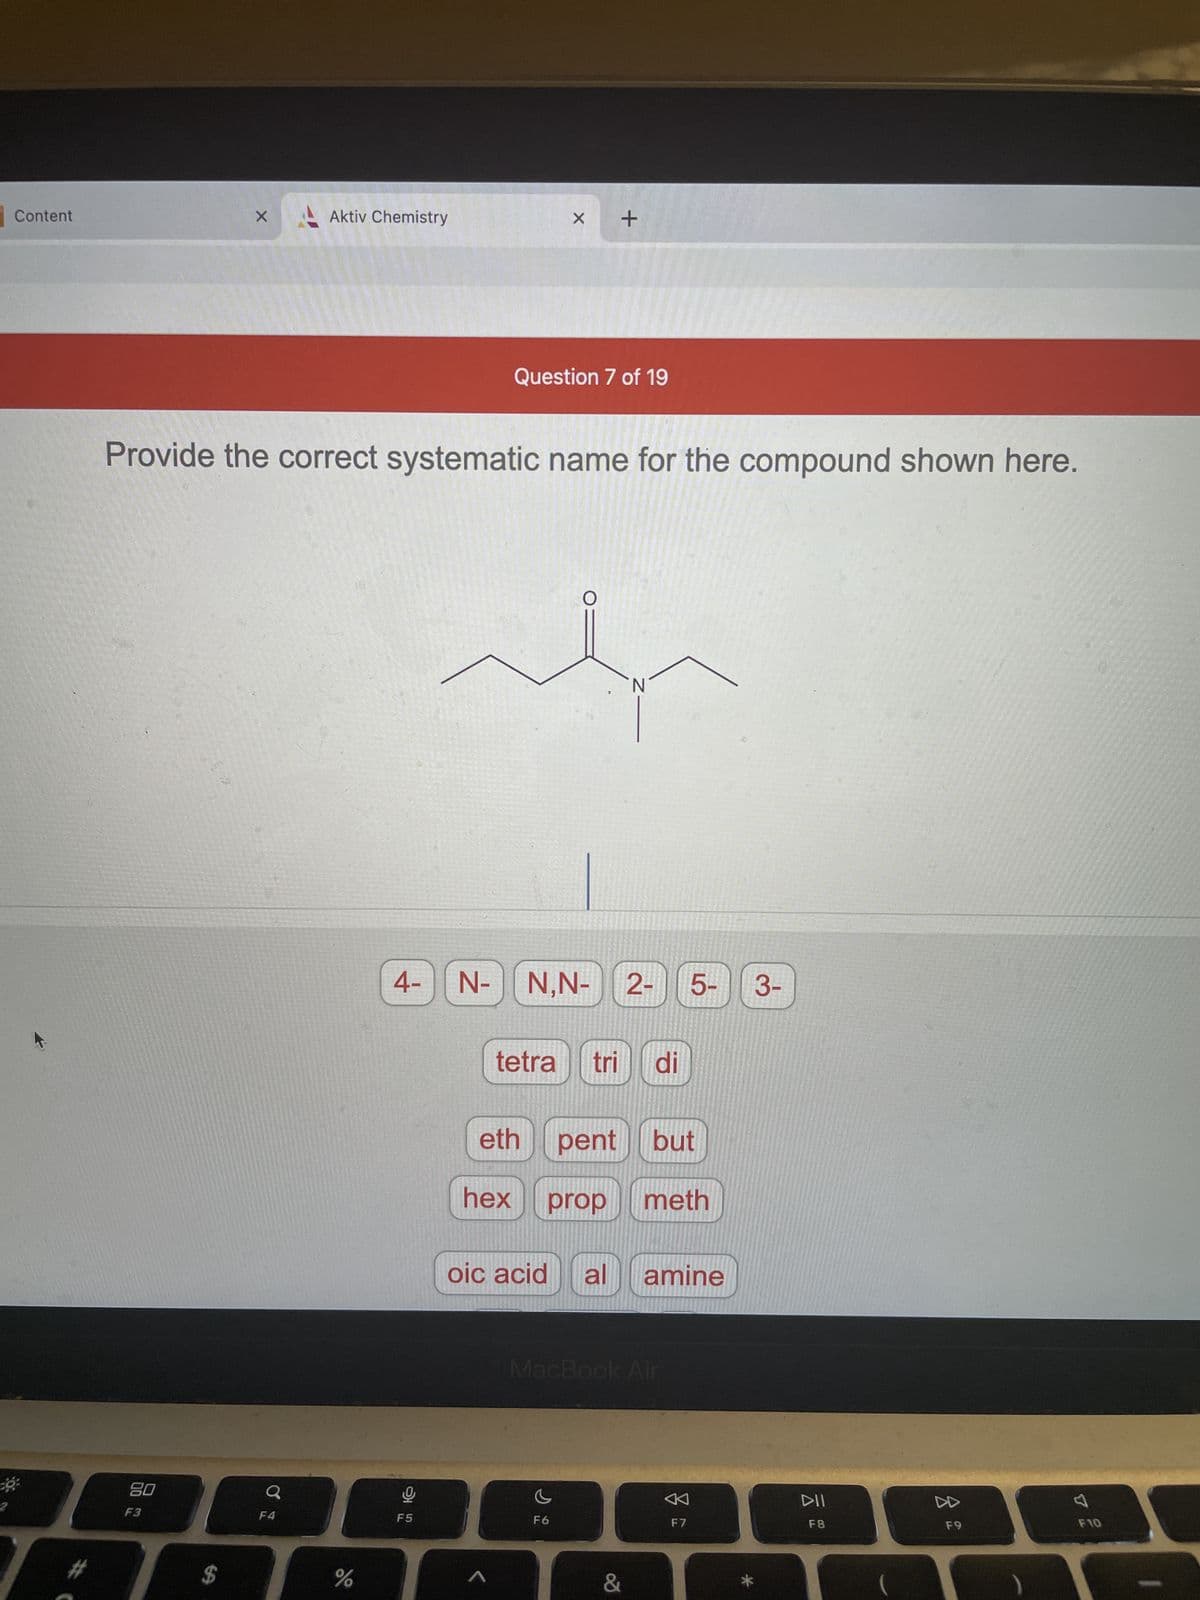 80
F3
Content
X
Aktiv Chemistry
Question 7 of 19
Provide the correct systematic name for the compound shown here.
N
N,N- | 2-
tetra tri di
eth
pent but
hex prop meth
oic acid al amine
MacBook Air
c
F6
$
Q
%
4-
뽀
F5
N-
X
A
+
&
F7
5-
3-
DII
F8
DD
F9
7
F10